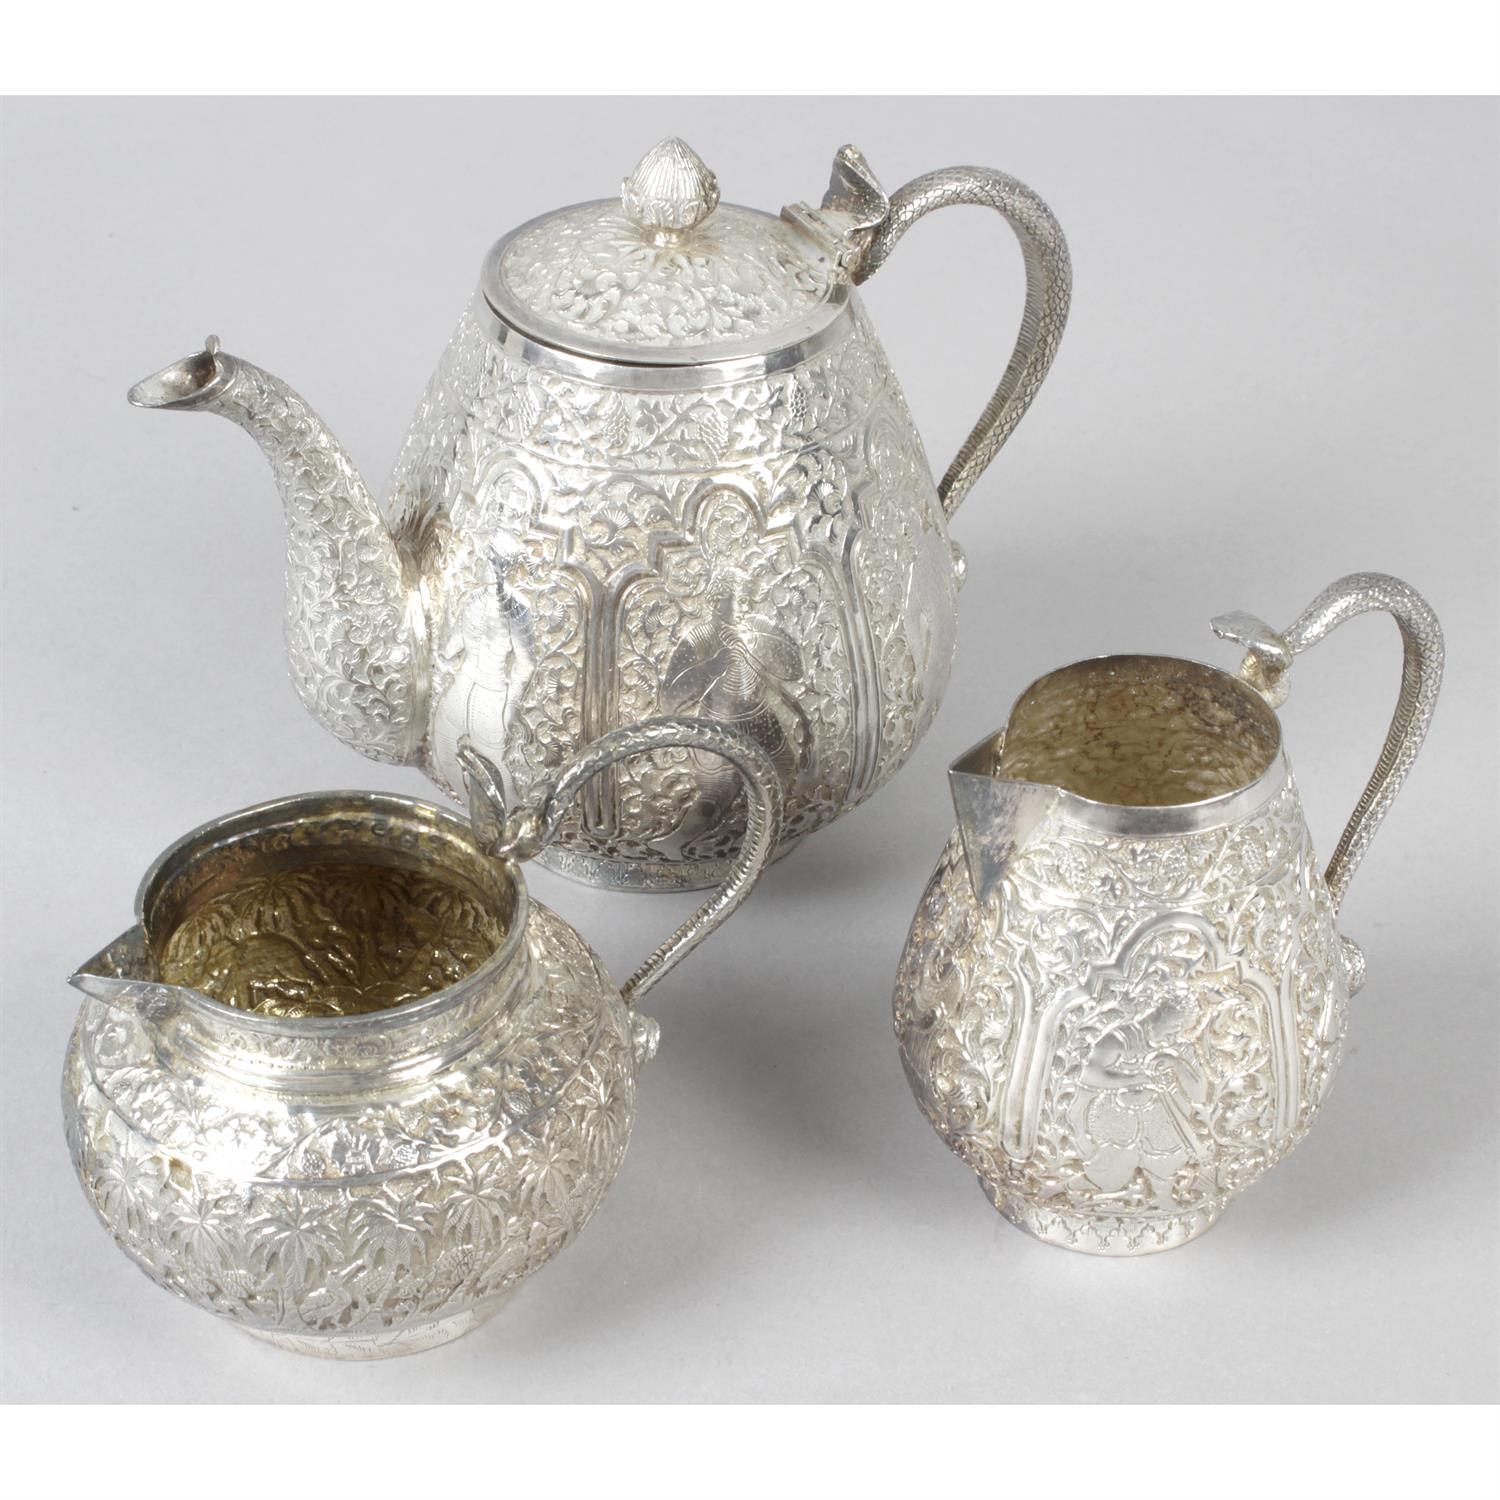 A small teapot and two cream jugs, probably Indian. (3).